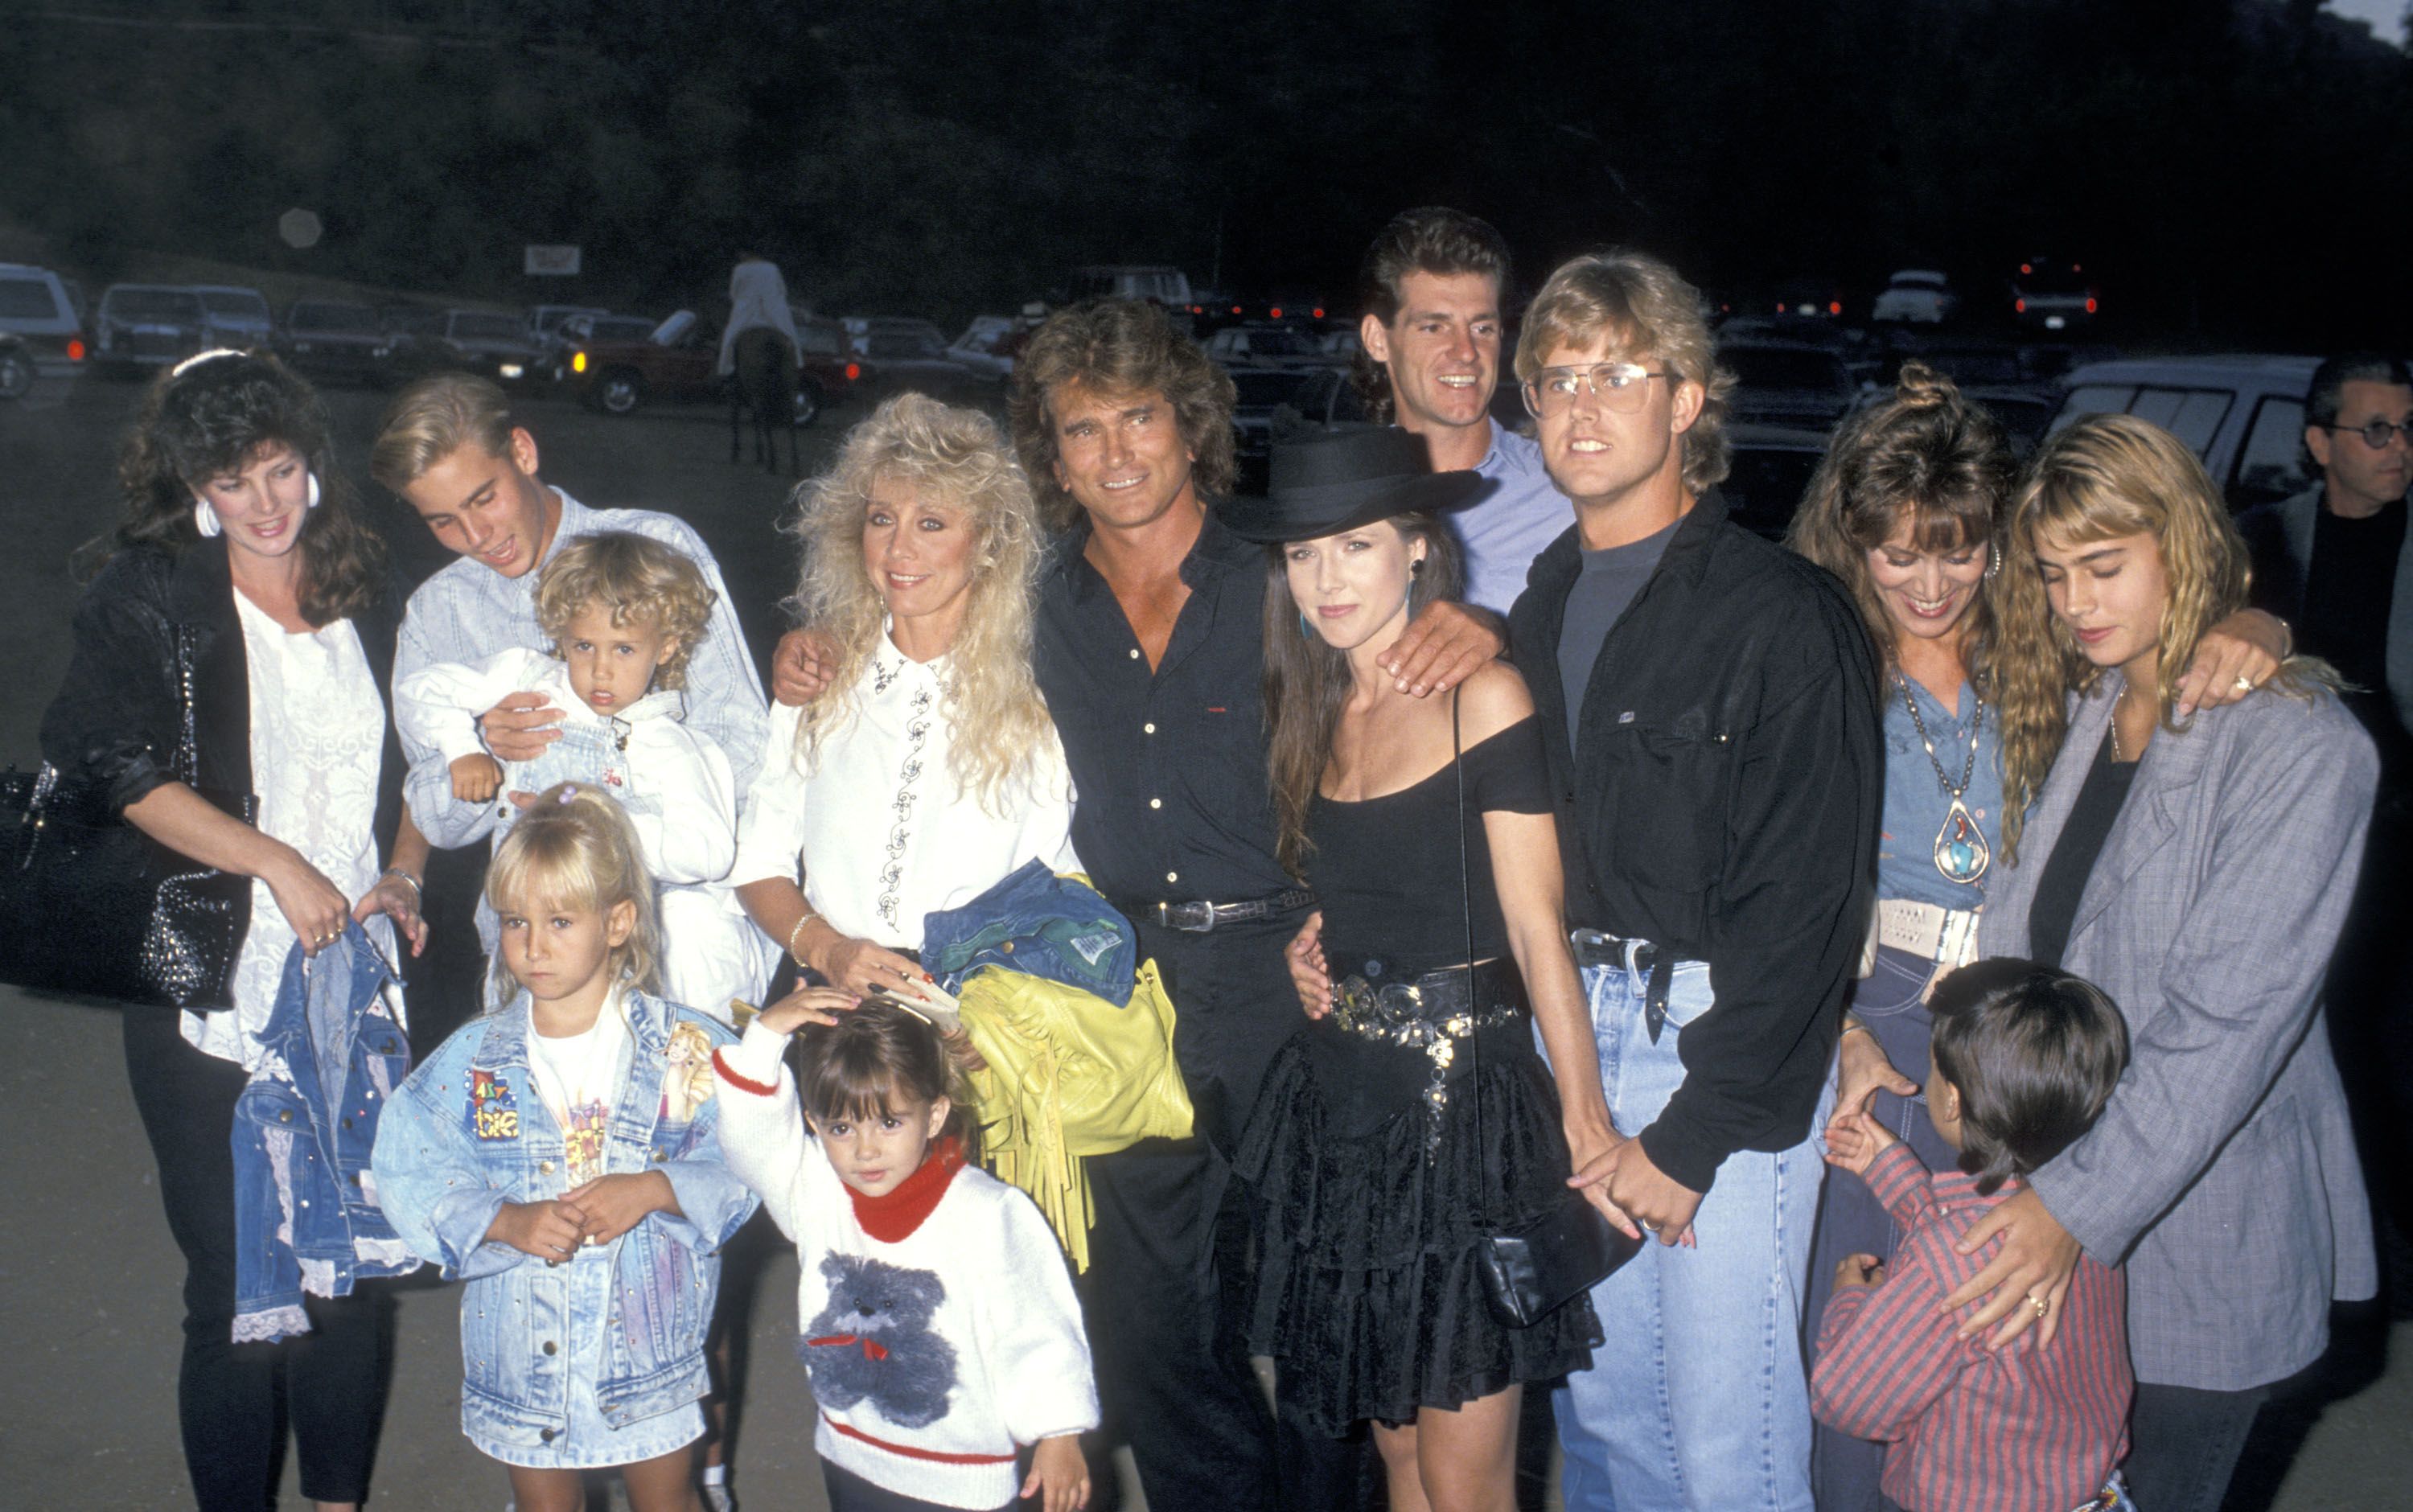 Michael Landon and his children at Third Annual Moonlight Roundup Benefiting Free Arts for Abused Children in Malibu, in 1989 | Source: Getty Images